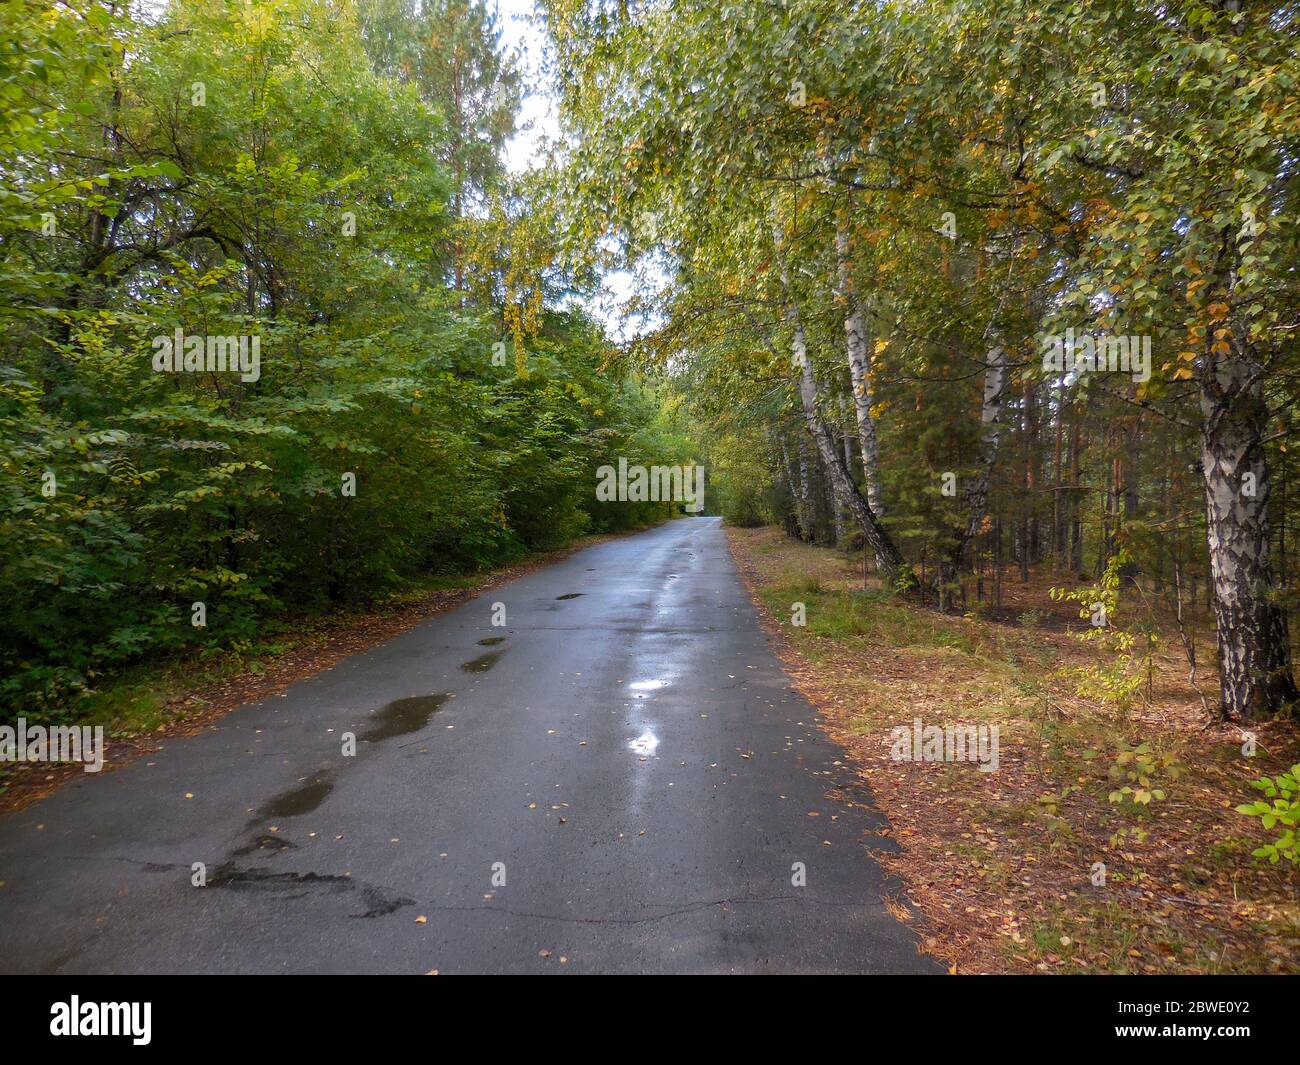 chelyabinsk, russia 06 06 2019: Asphalt road in Yuri Gagarin Nature Park in autumn in Chelyabinsk, Russia. The beginning of the deciduous leaves in au Stock Photo